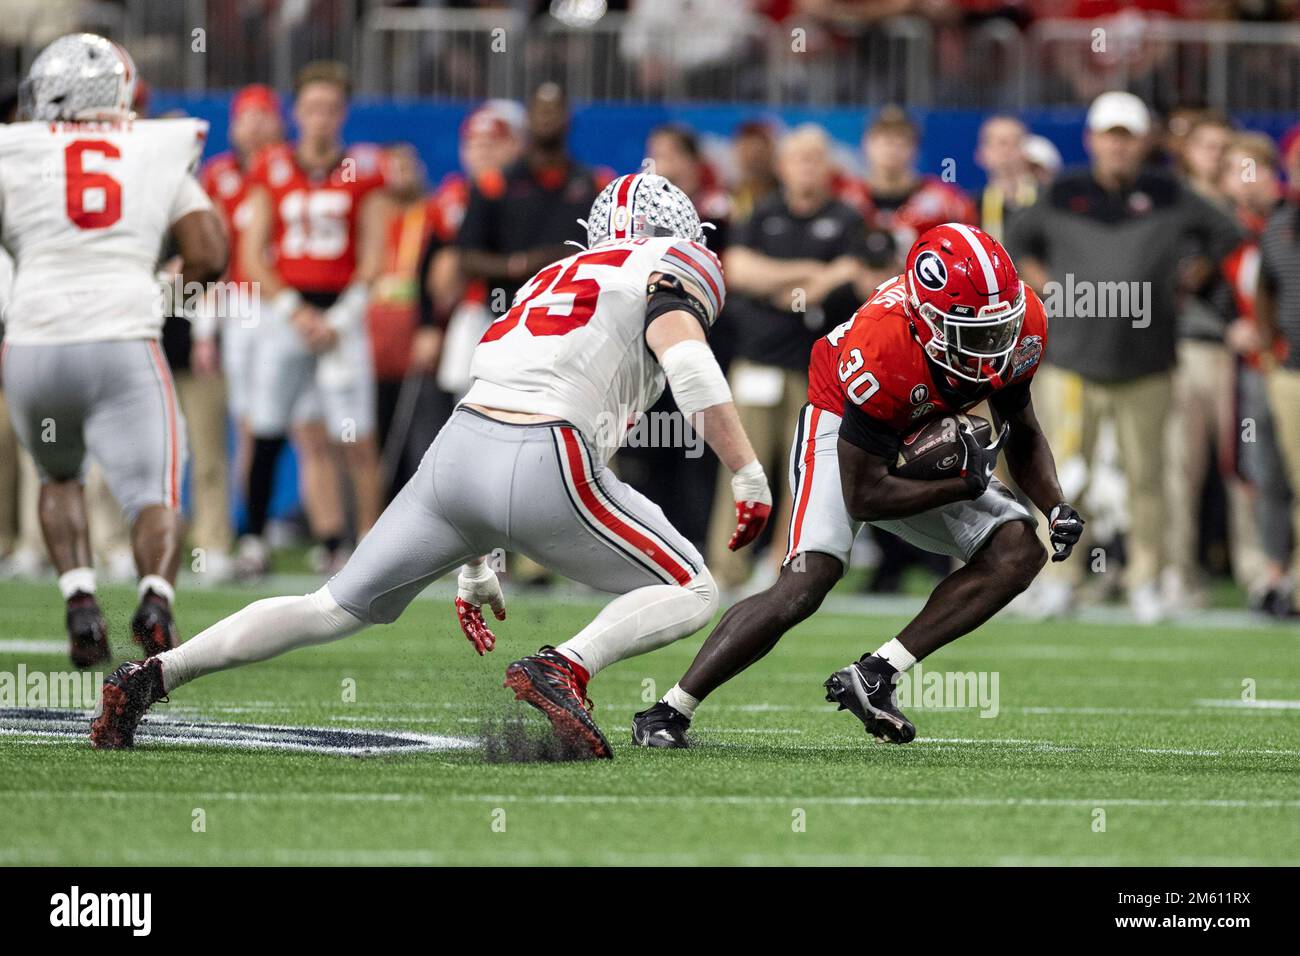 Atlanta, Georgia. 31st Dec, 2022. Georgia running back Daijun Edwards (30) runs with the ball as Ohio State linebacker Tommy Eichenberg (35) pursues during NCAA football game action between the Ohio State Buckeyes and the Georgia Bulldogs at Mercedes-Benz Stadium in Atlanta, Georgia. Georgia defeated Ohio State 42-41. John Mersits/CSM/Alamy Live News Stock Photo